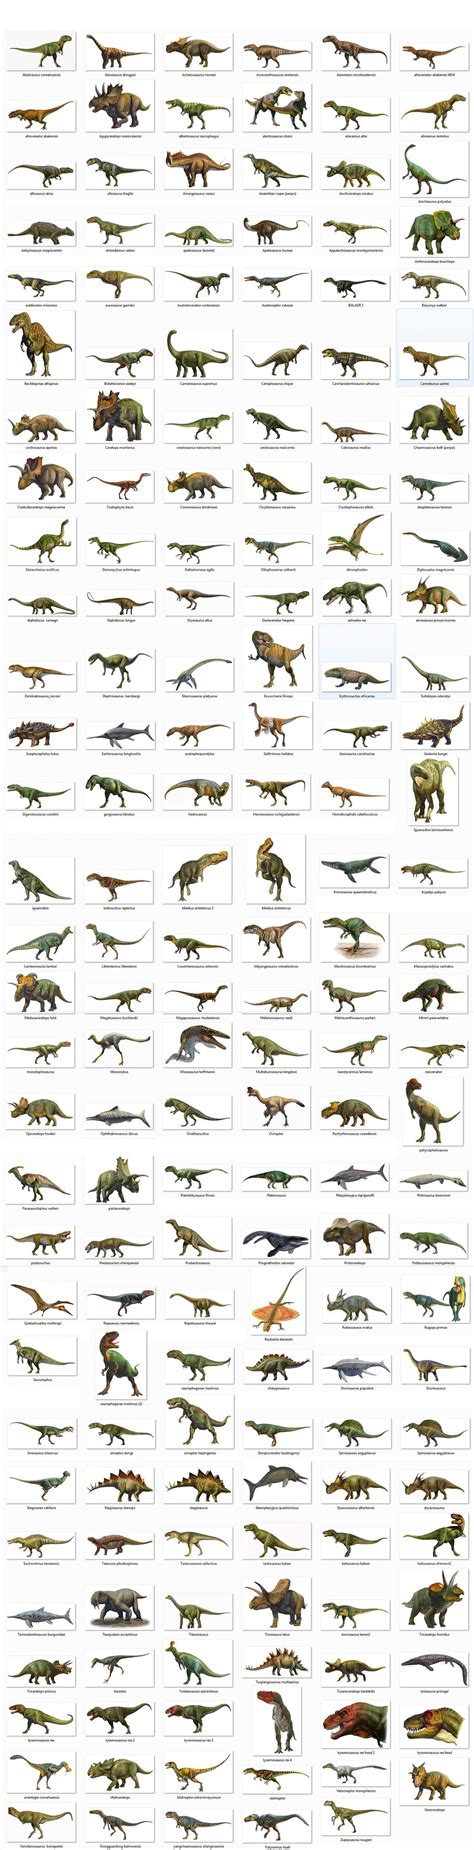 Chart Types Of Dinosaurs